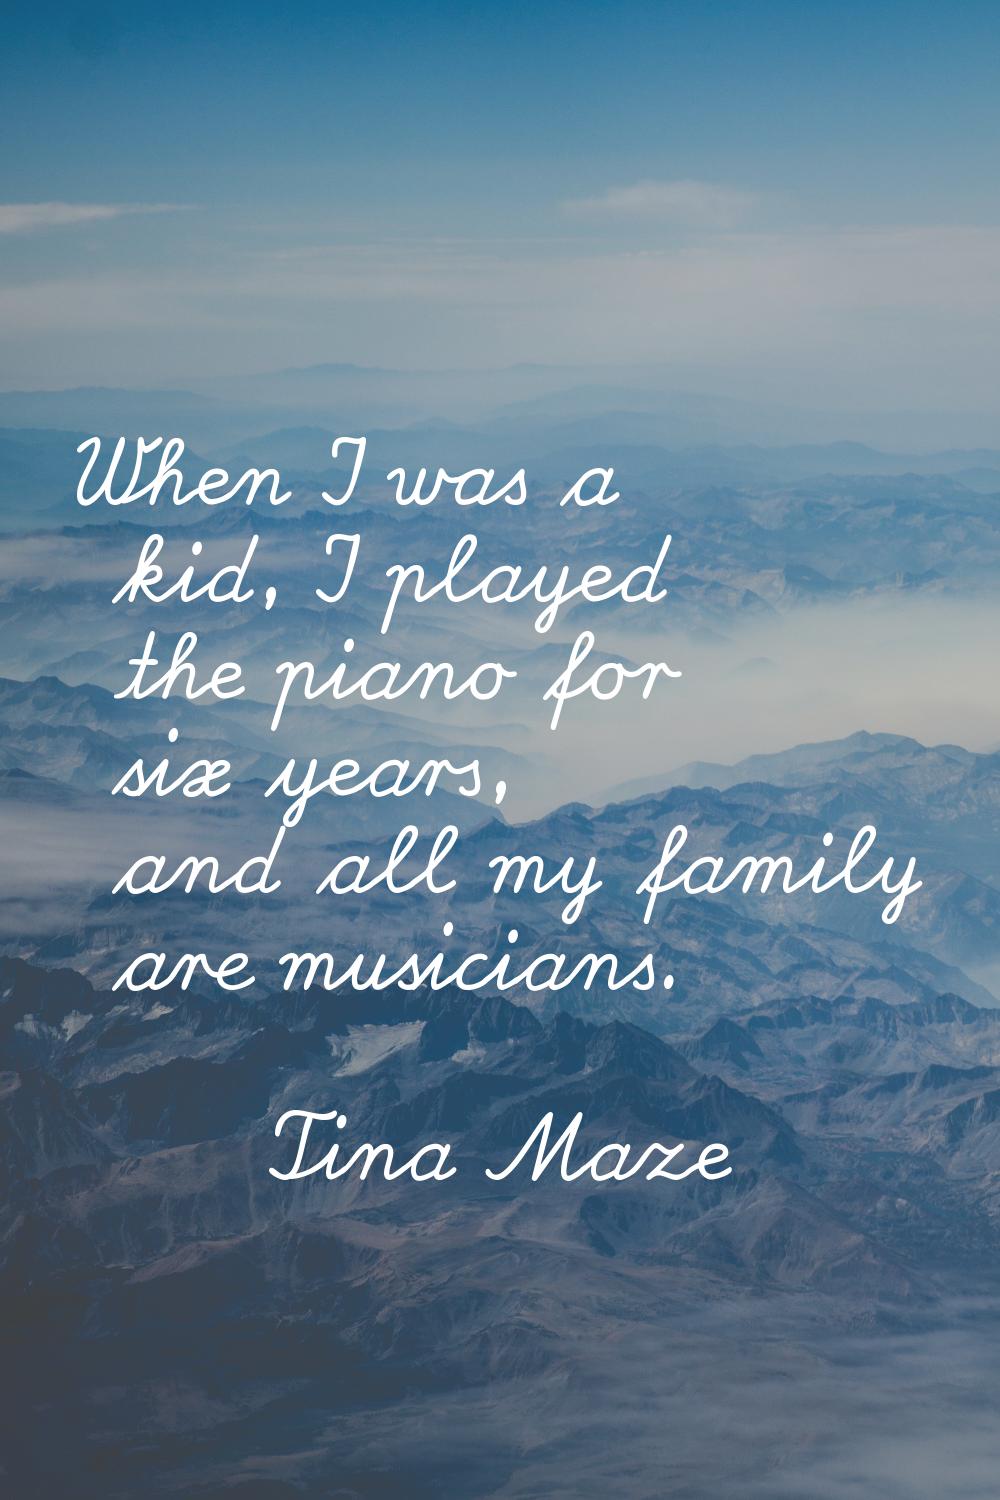 When I was a kid, I played the piano for six years, and all my family are musicians.